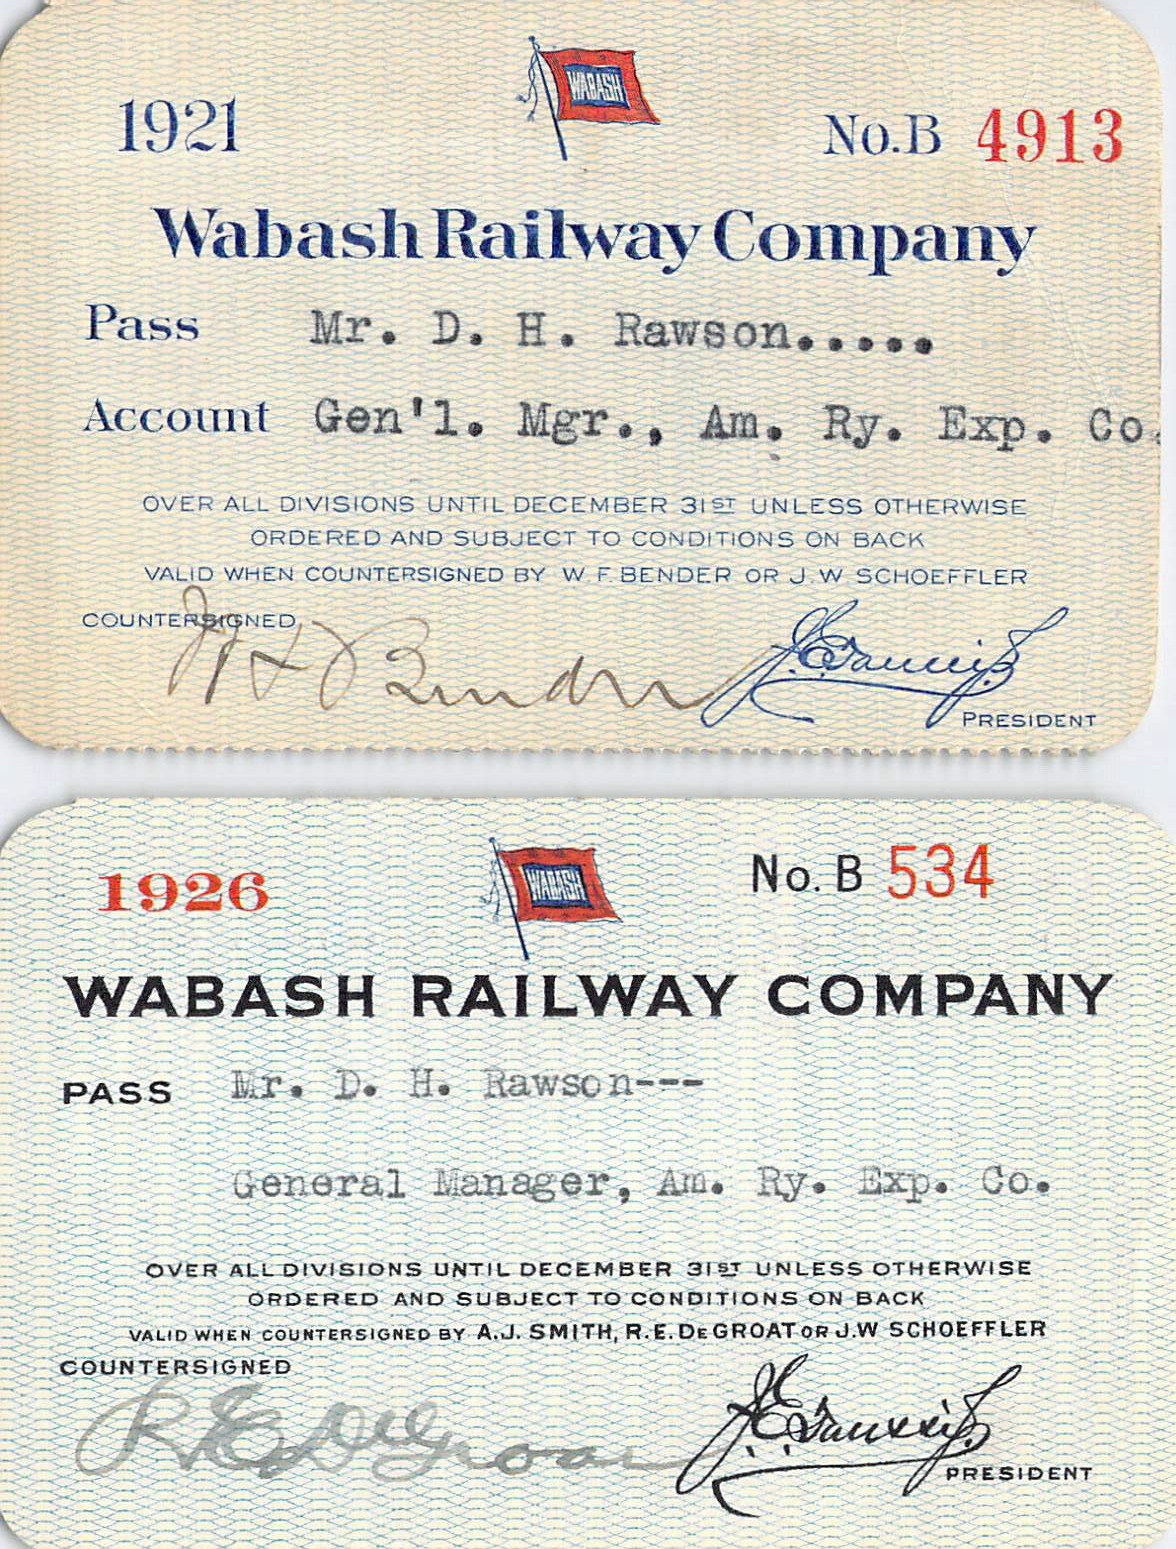 WABASH ARE EXPRESS AGT  RAILROAD RR RY RAILWAY PASS ccc